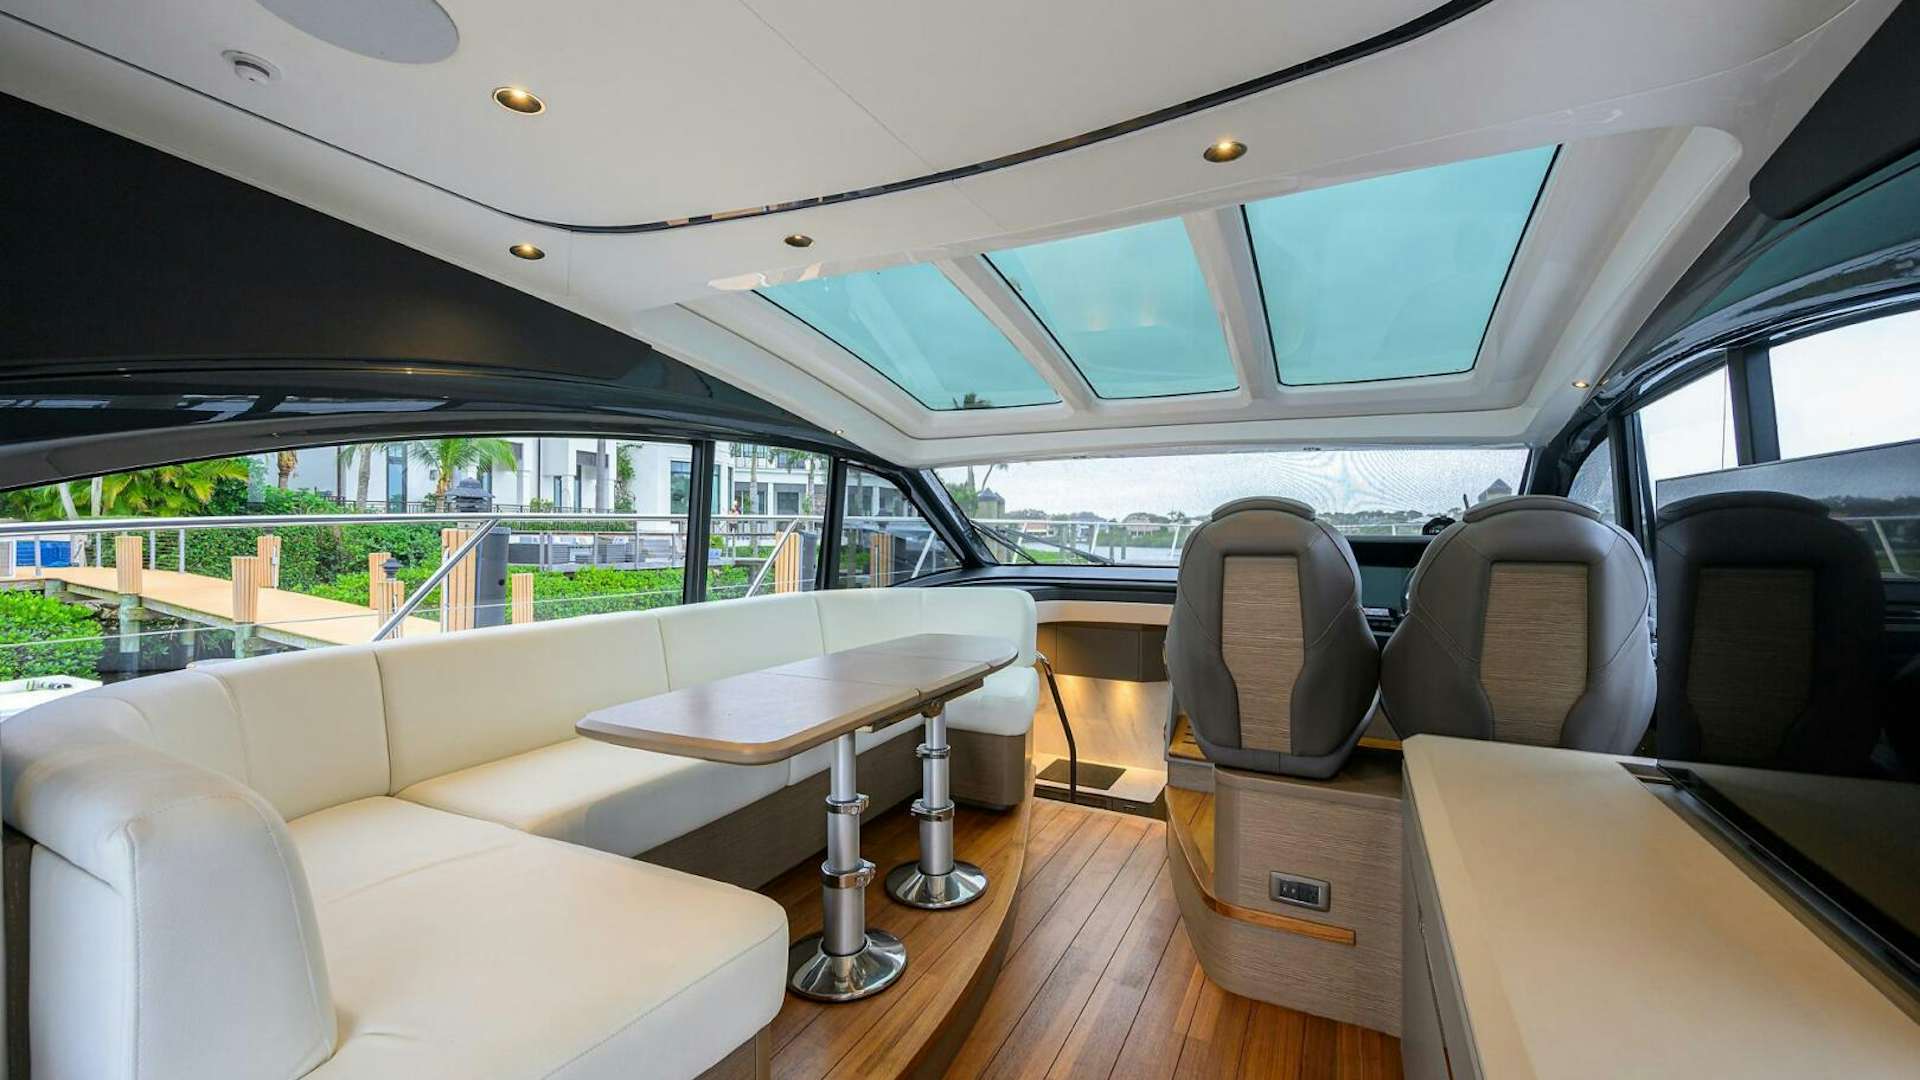 4c's
Yacht for Sale